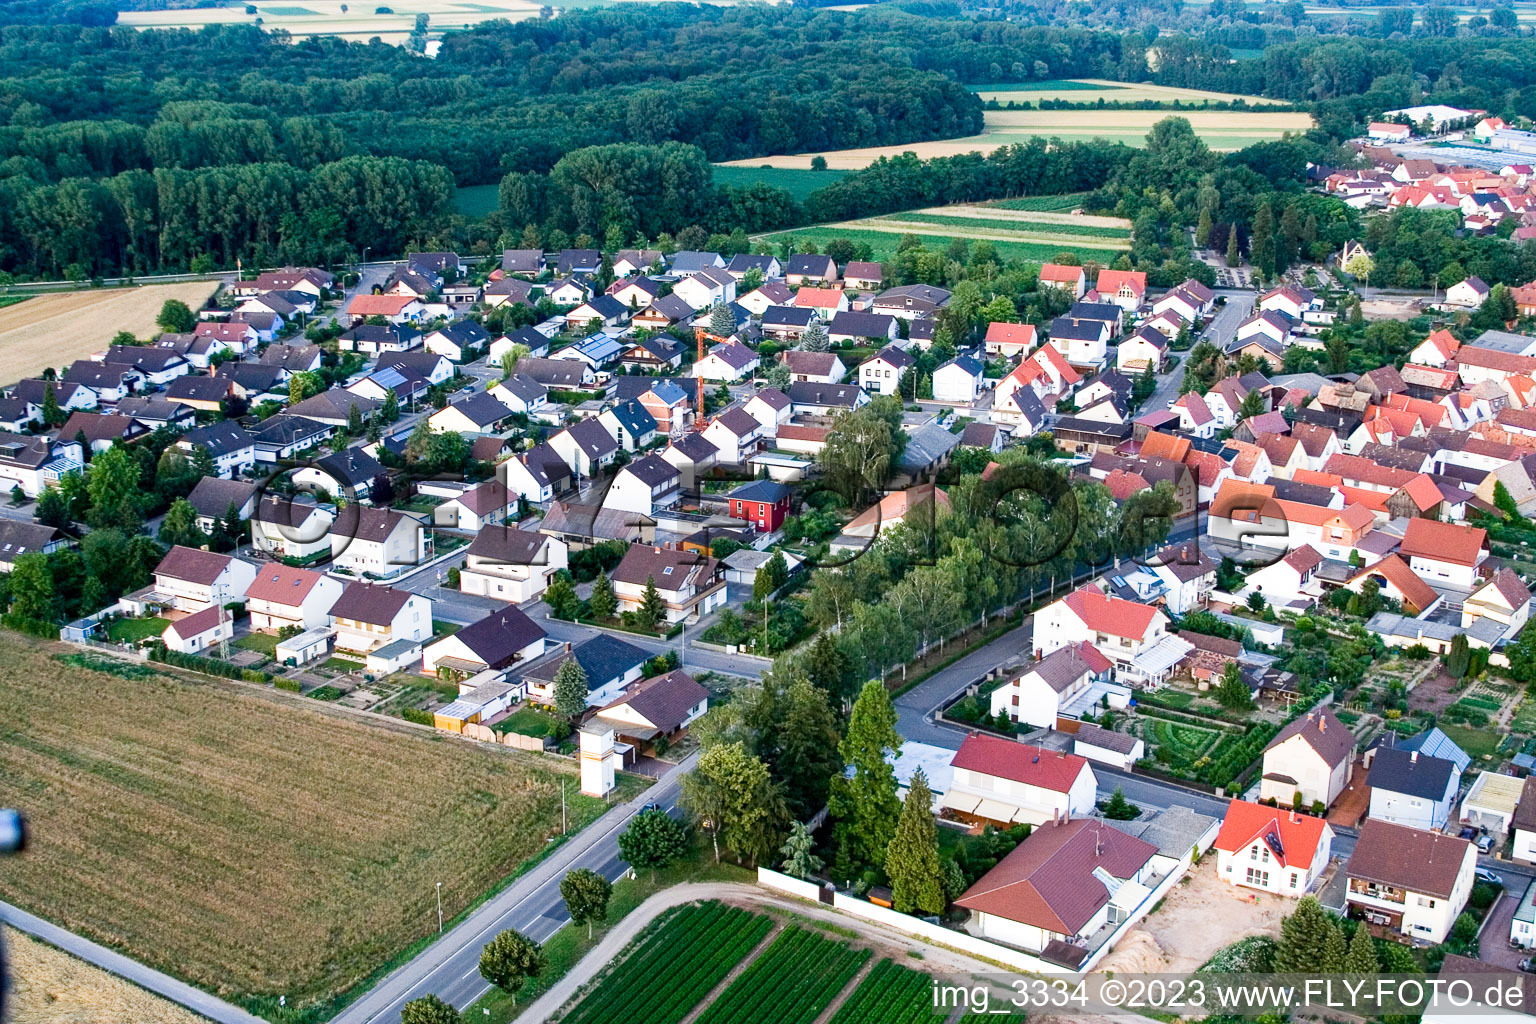 Kuhard in Kuhardt in the state Rhineland-Palatinate, Germany from the drone perspective